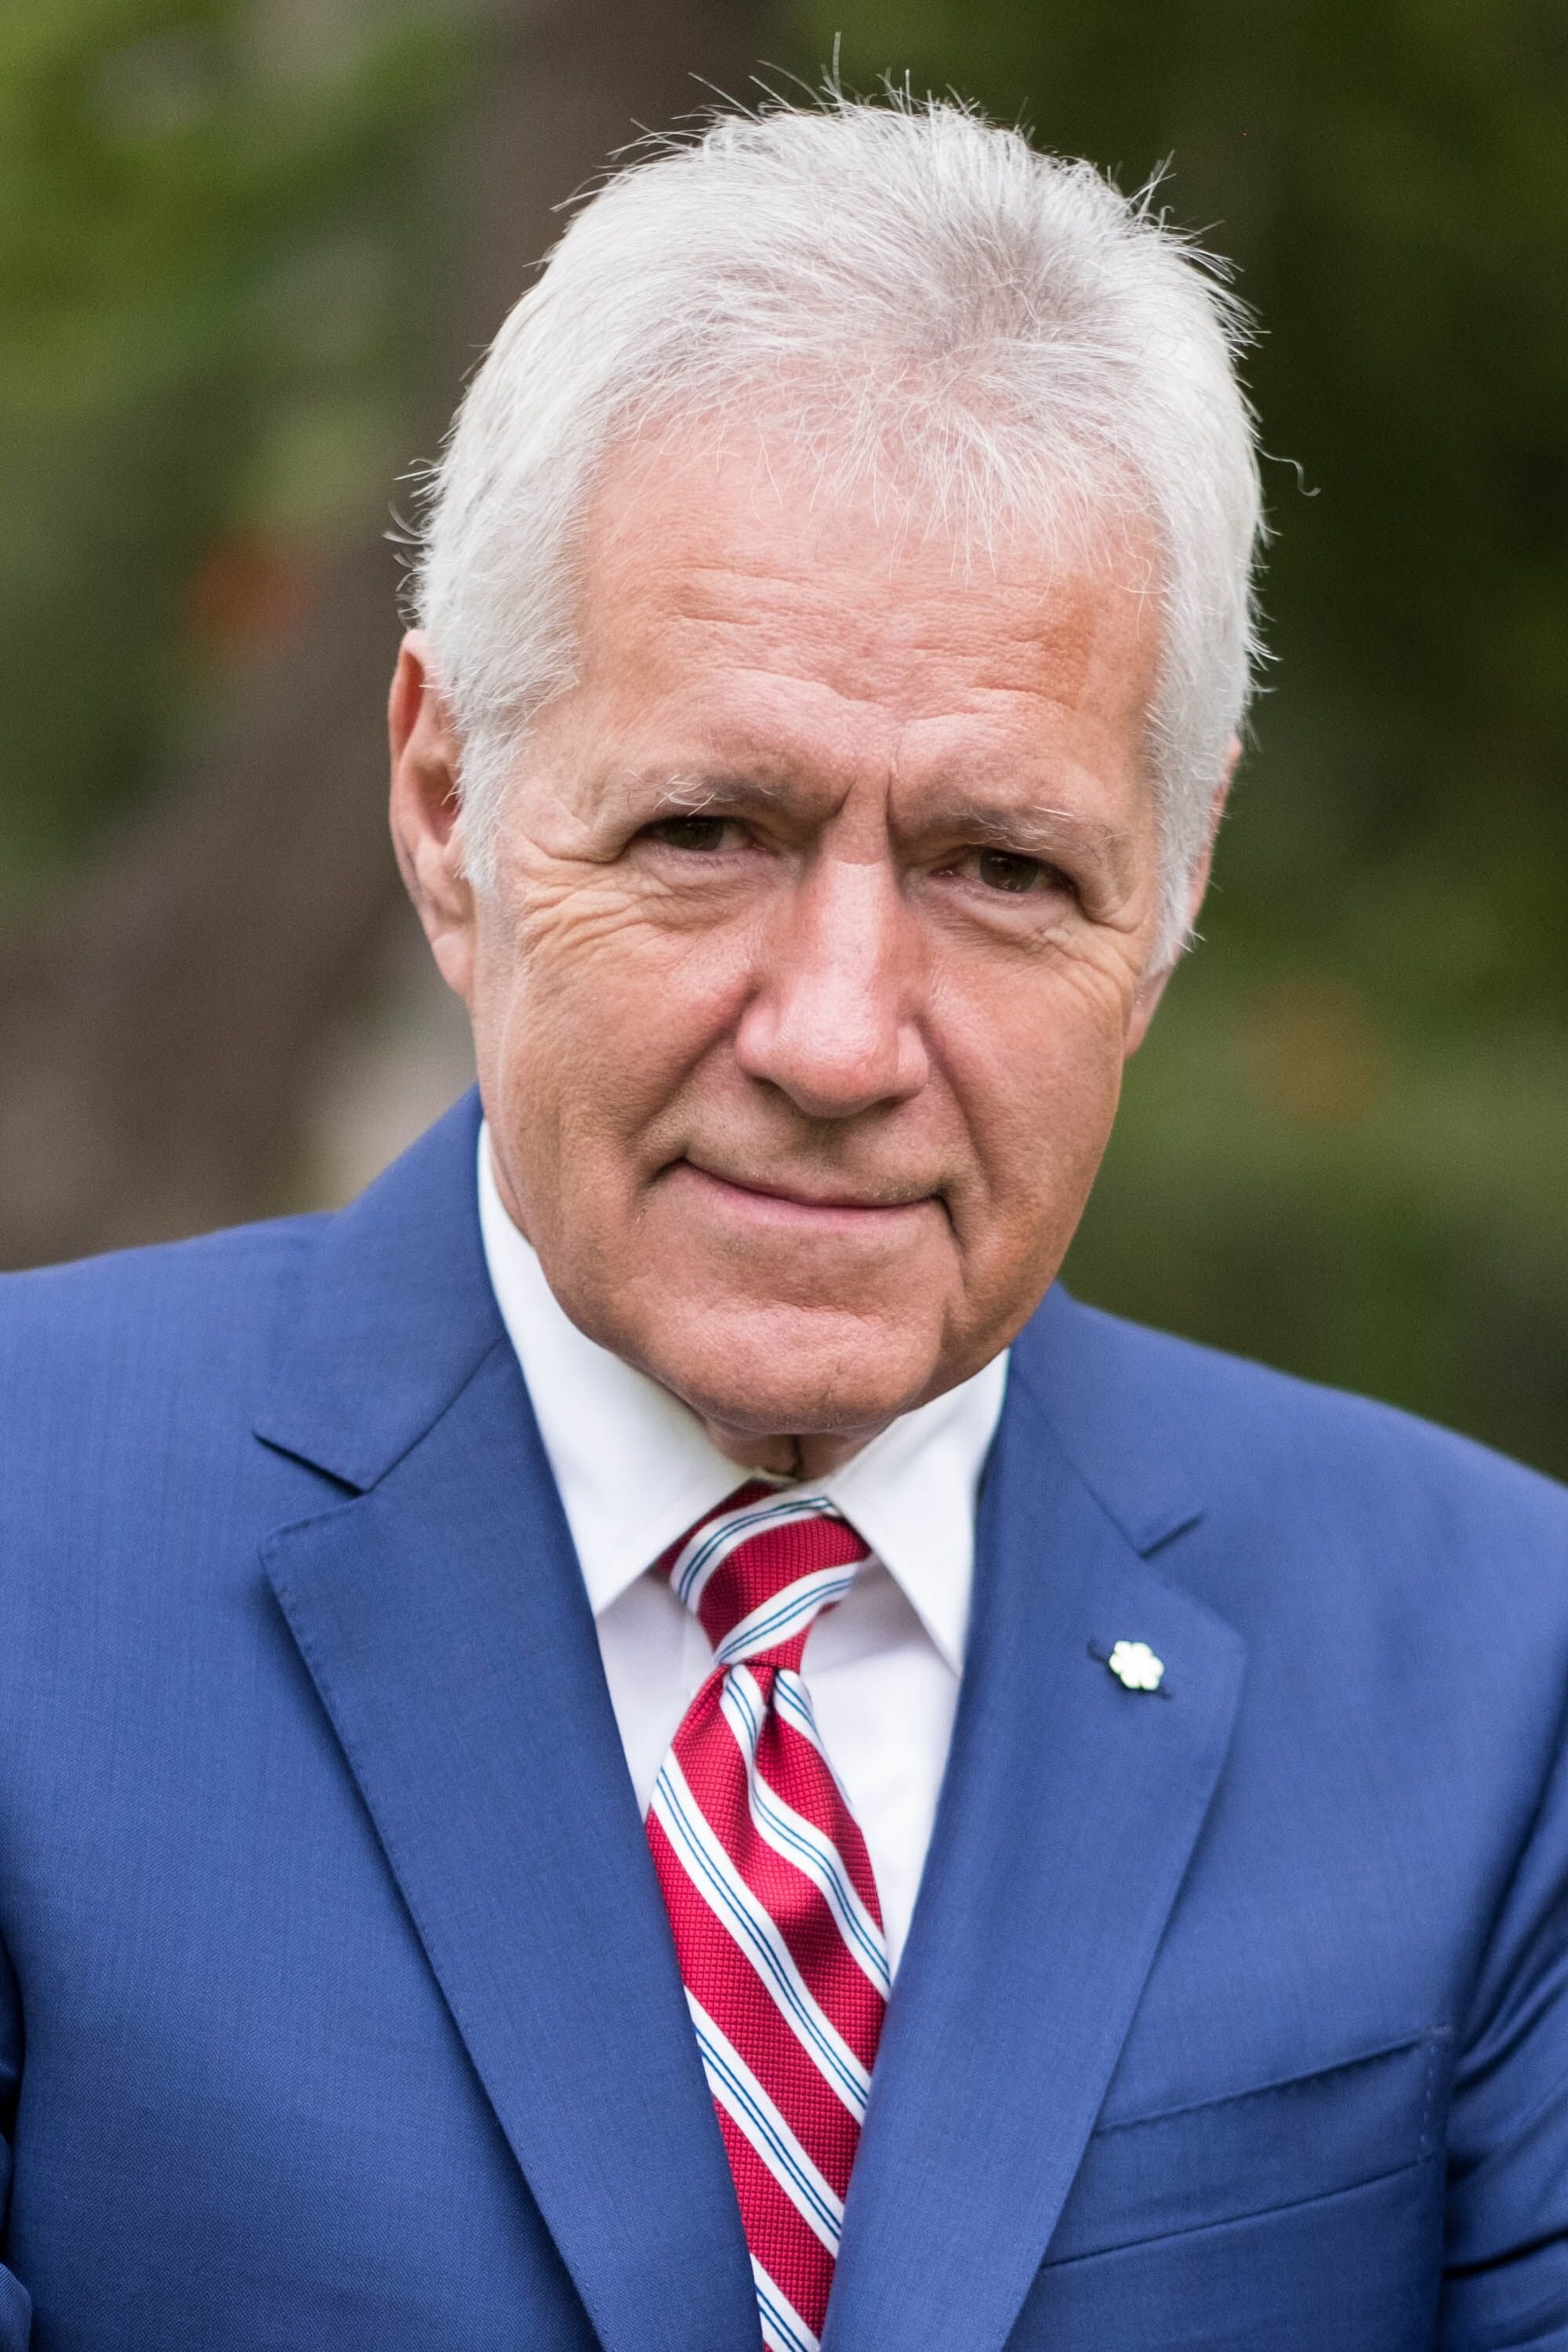 Alex Trebek attends the 150th anniversary of Canada's Confederation. | Source: Getty Images